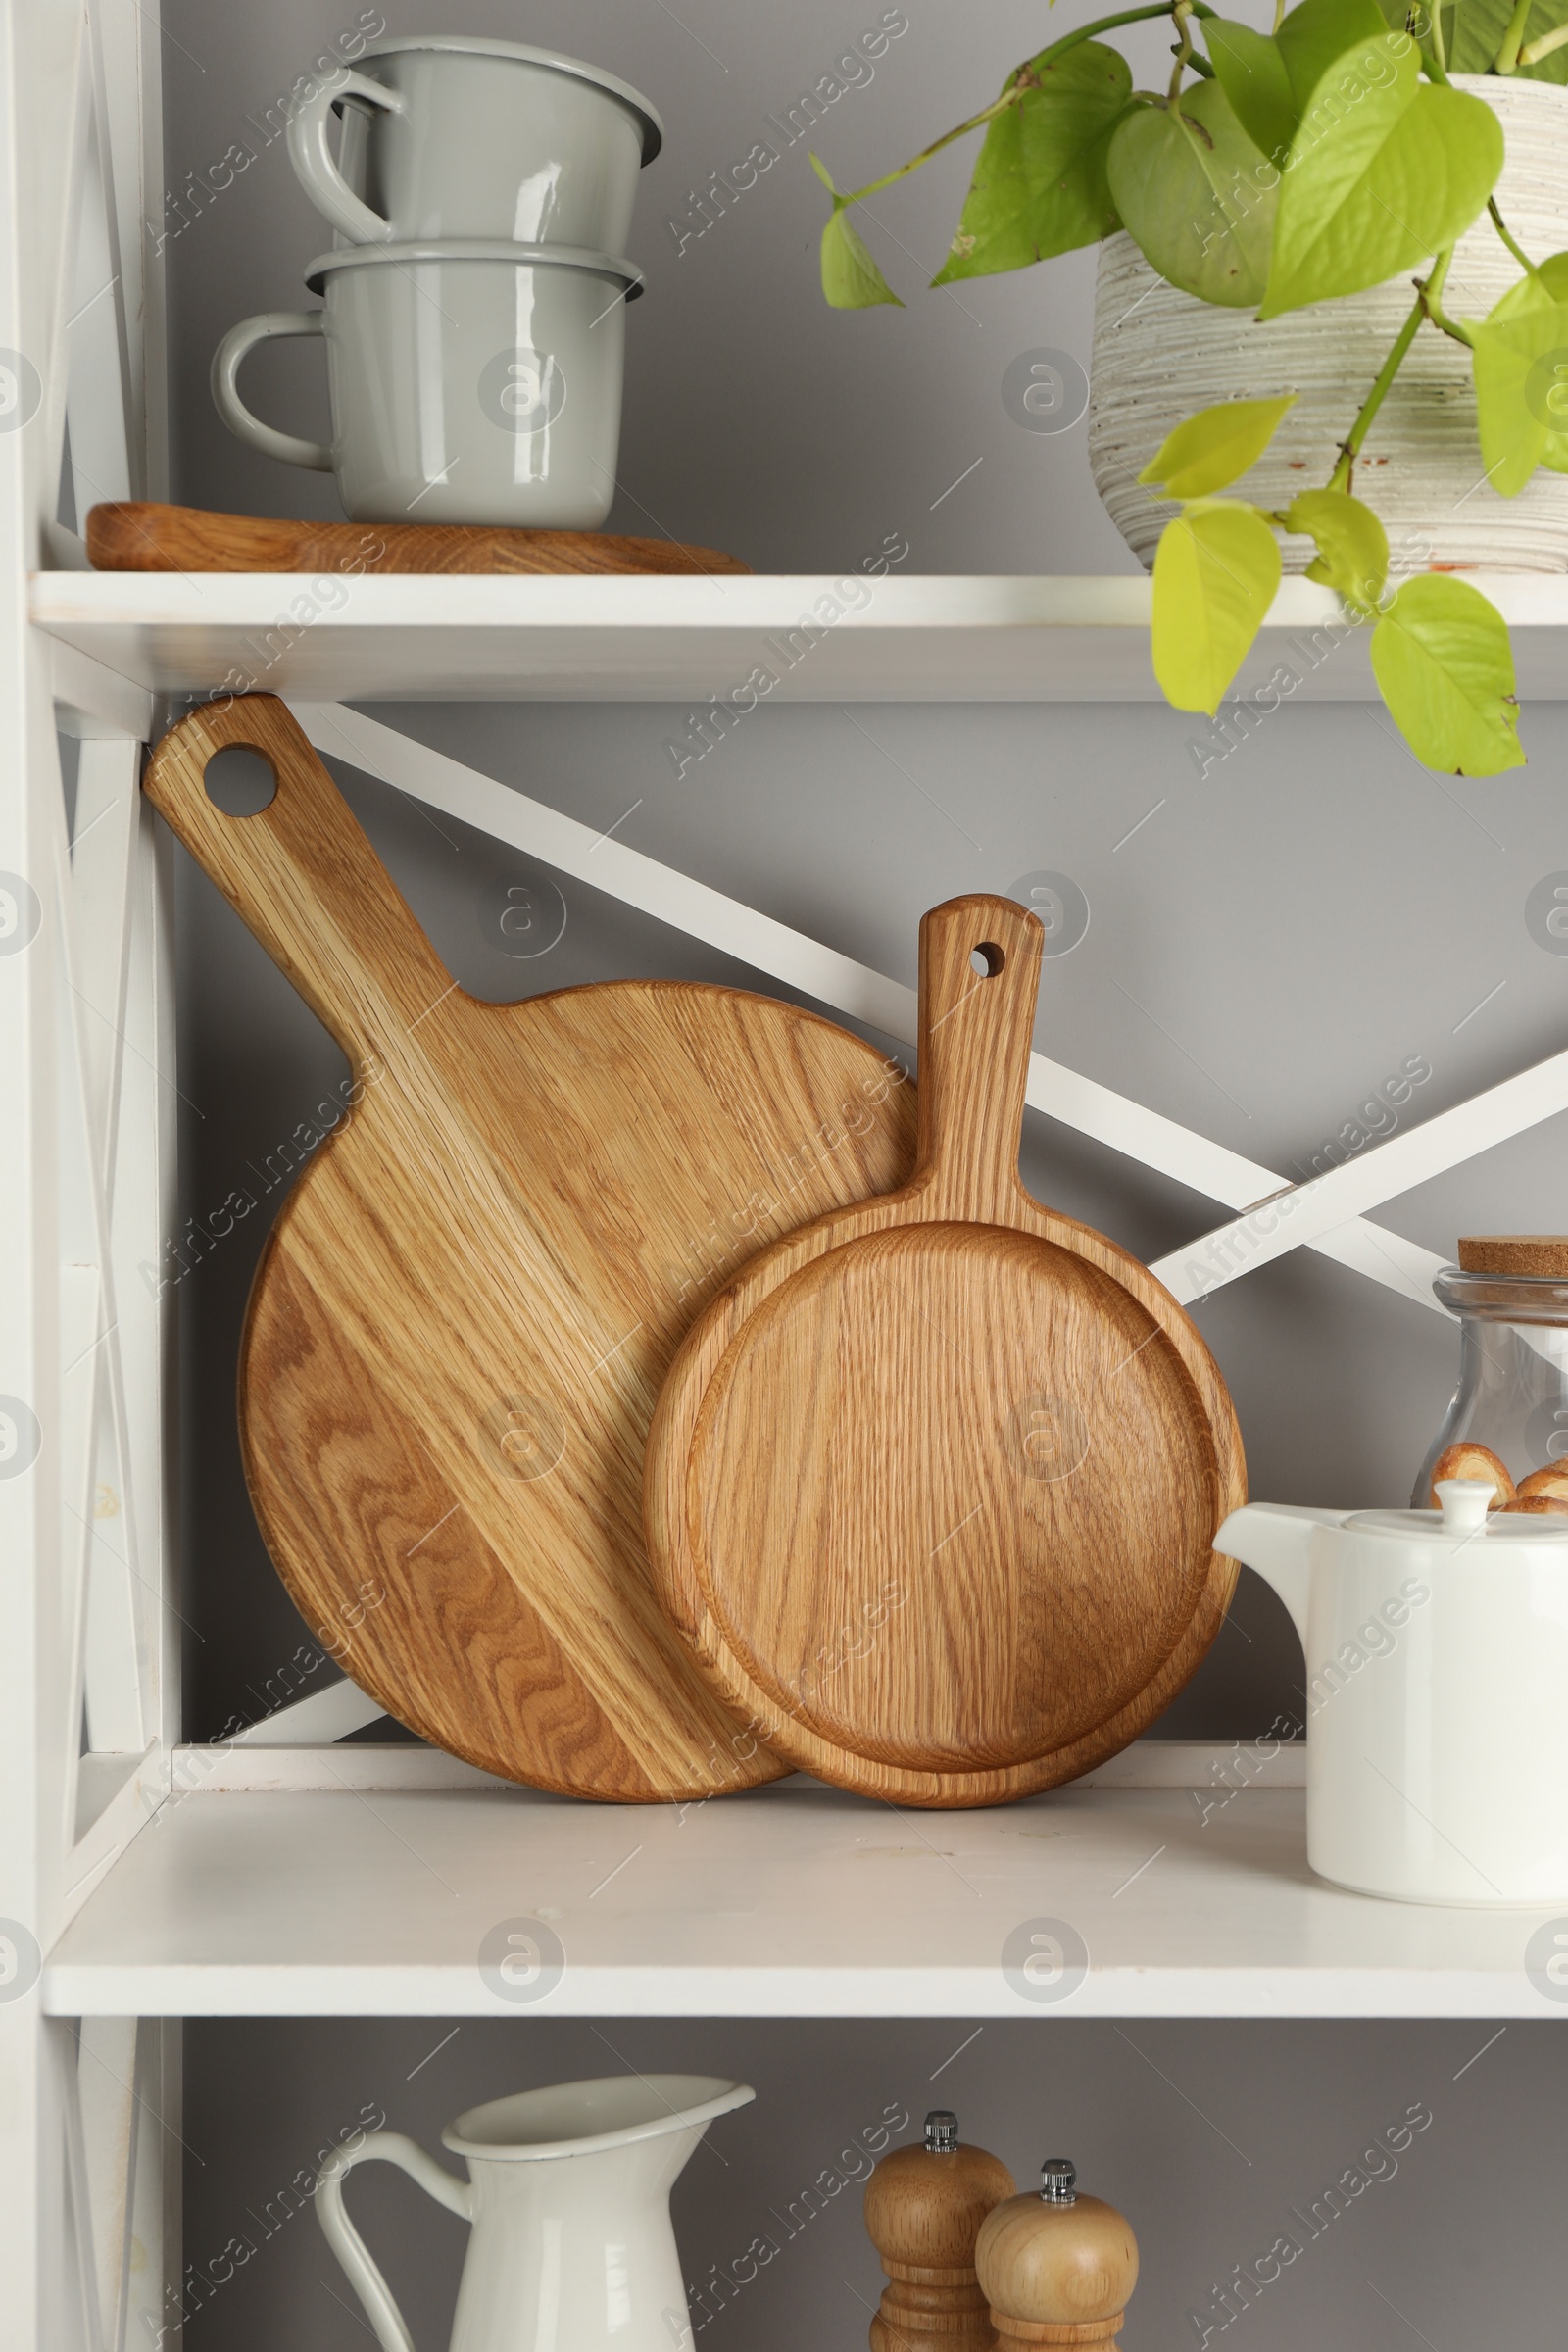 Photo of Wooden cutting boards and kitchen utensils on shelving unit